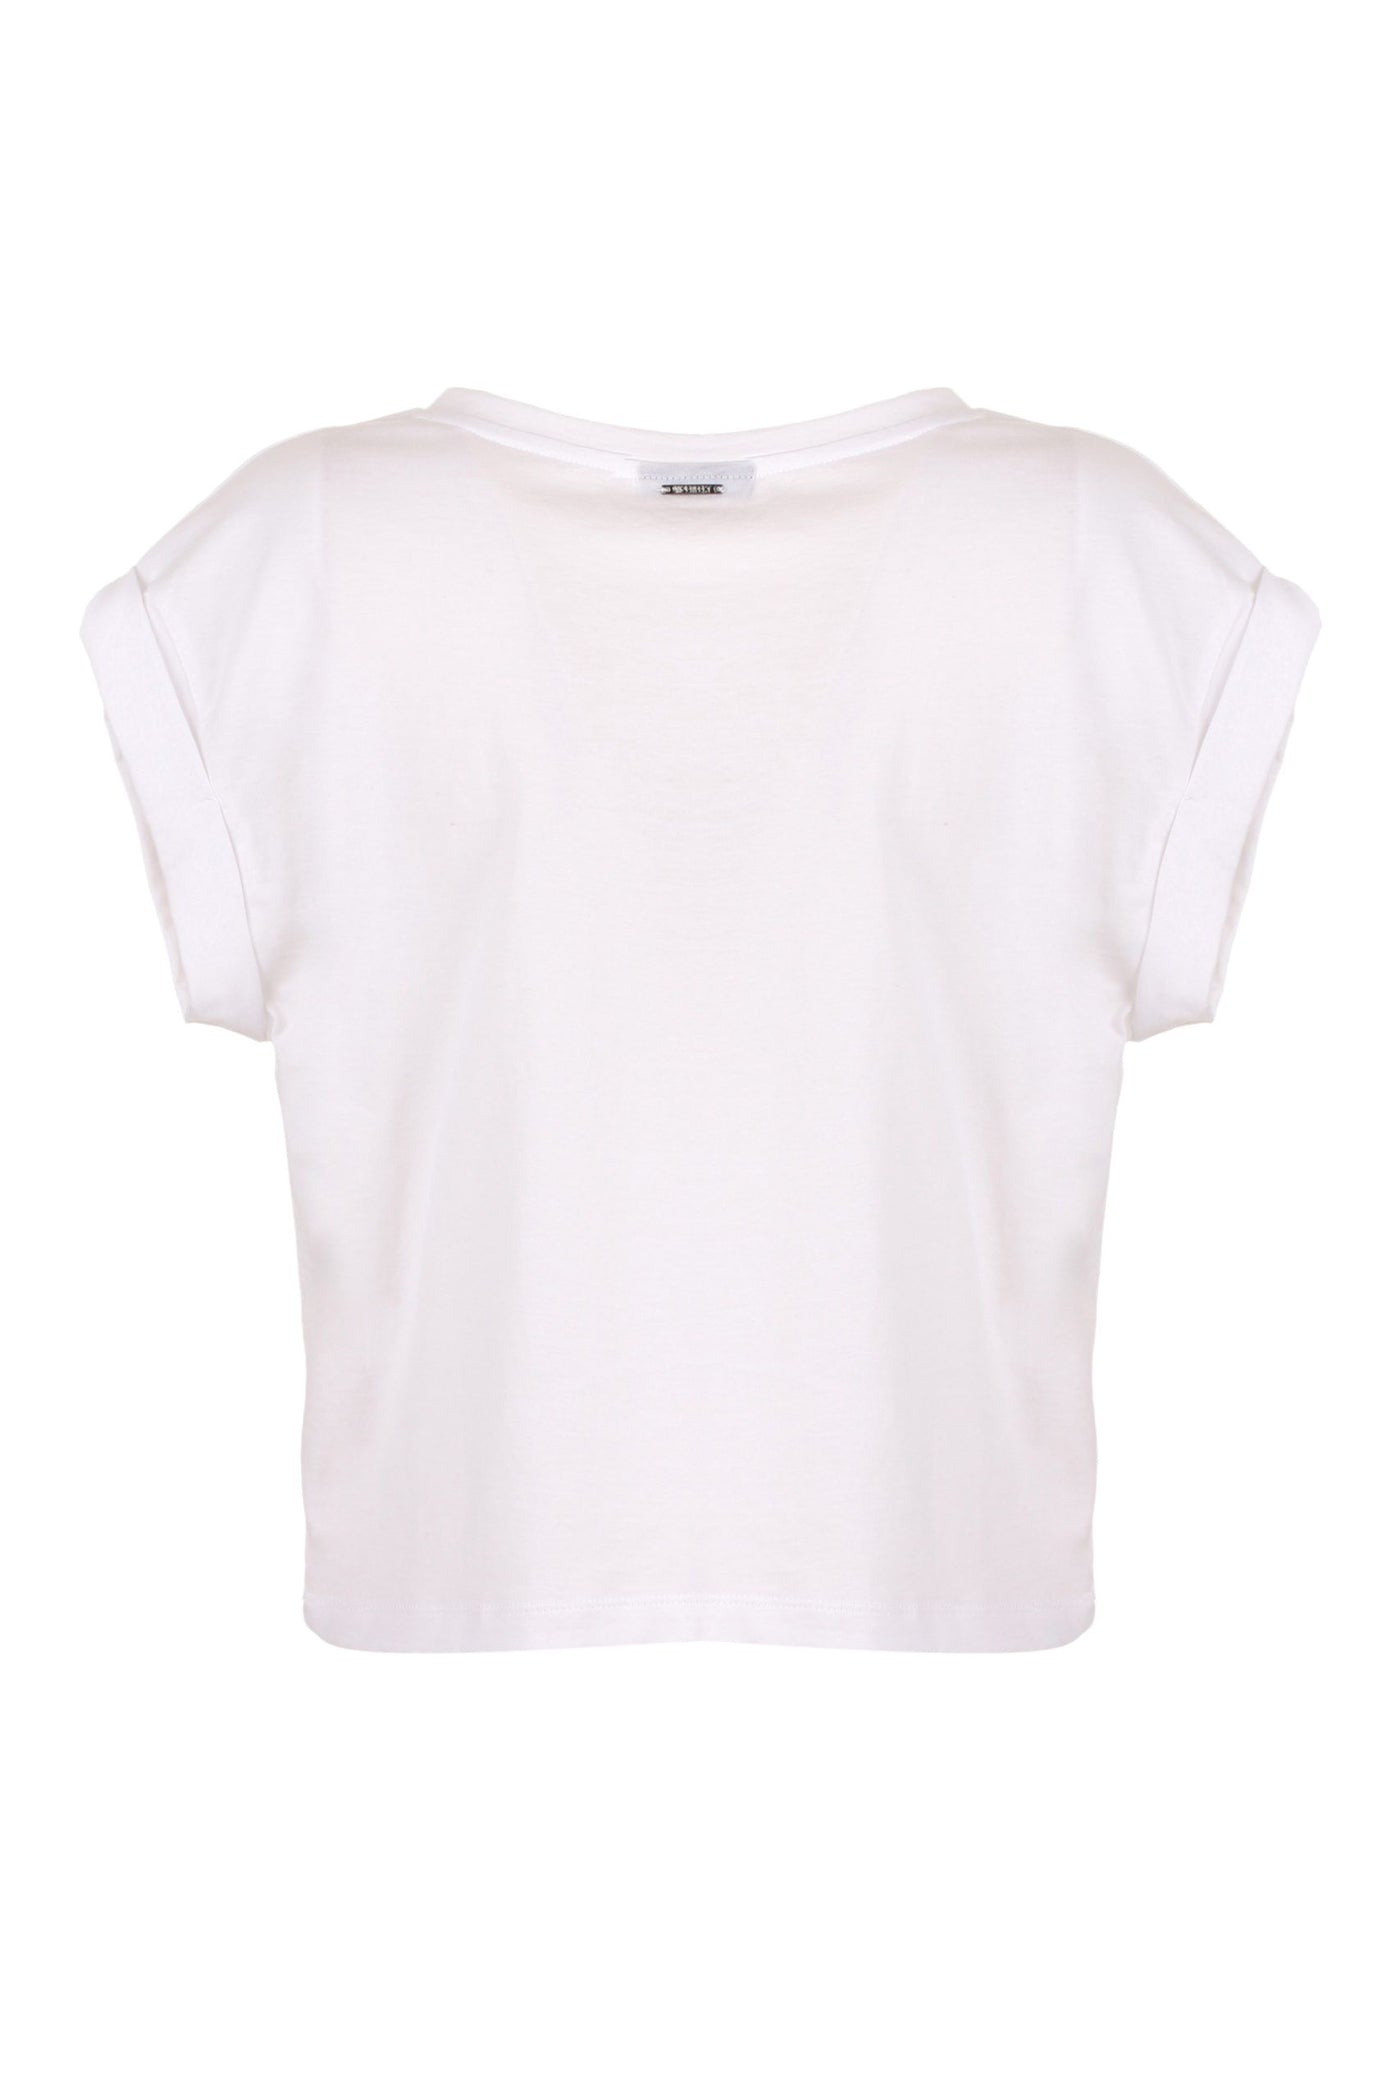 Imperfect White Cotton T-Shirt & Top